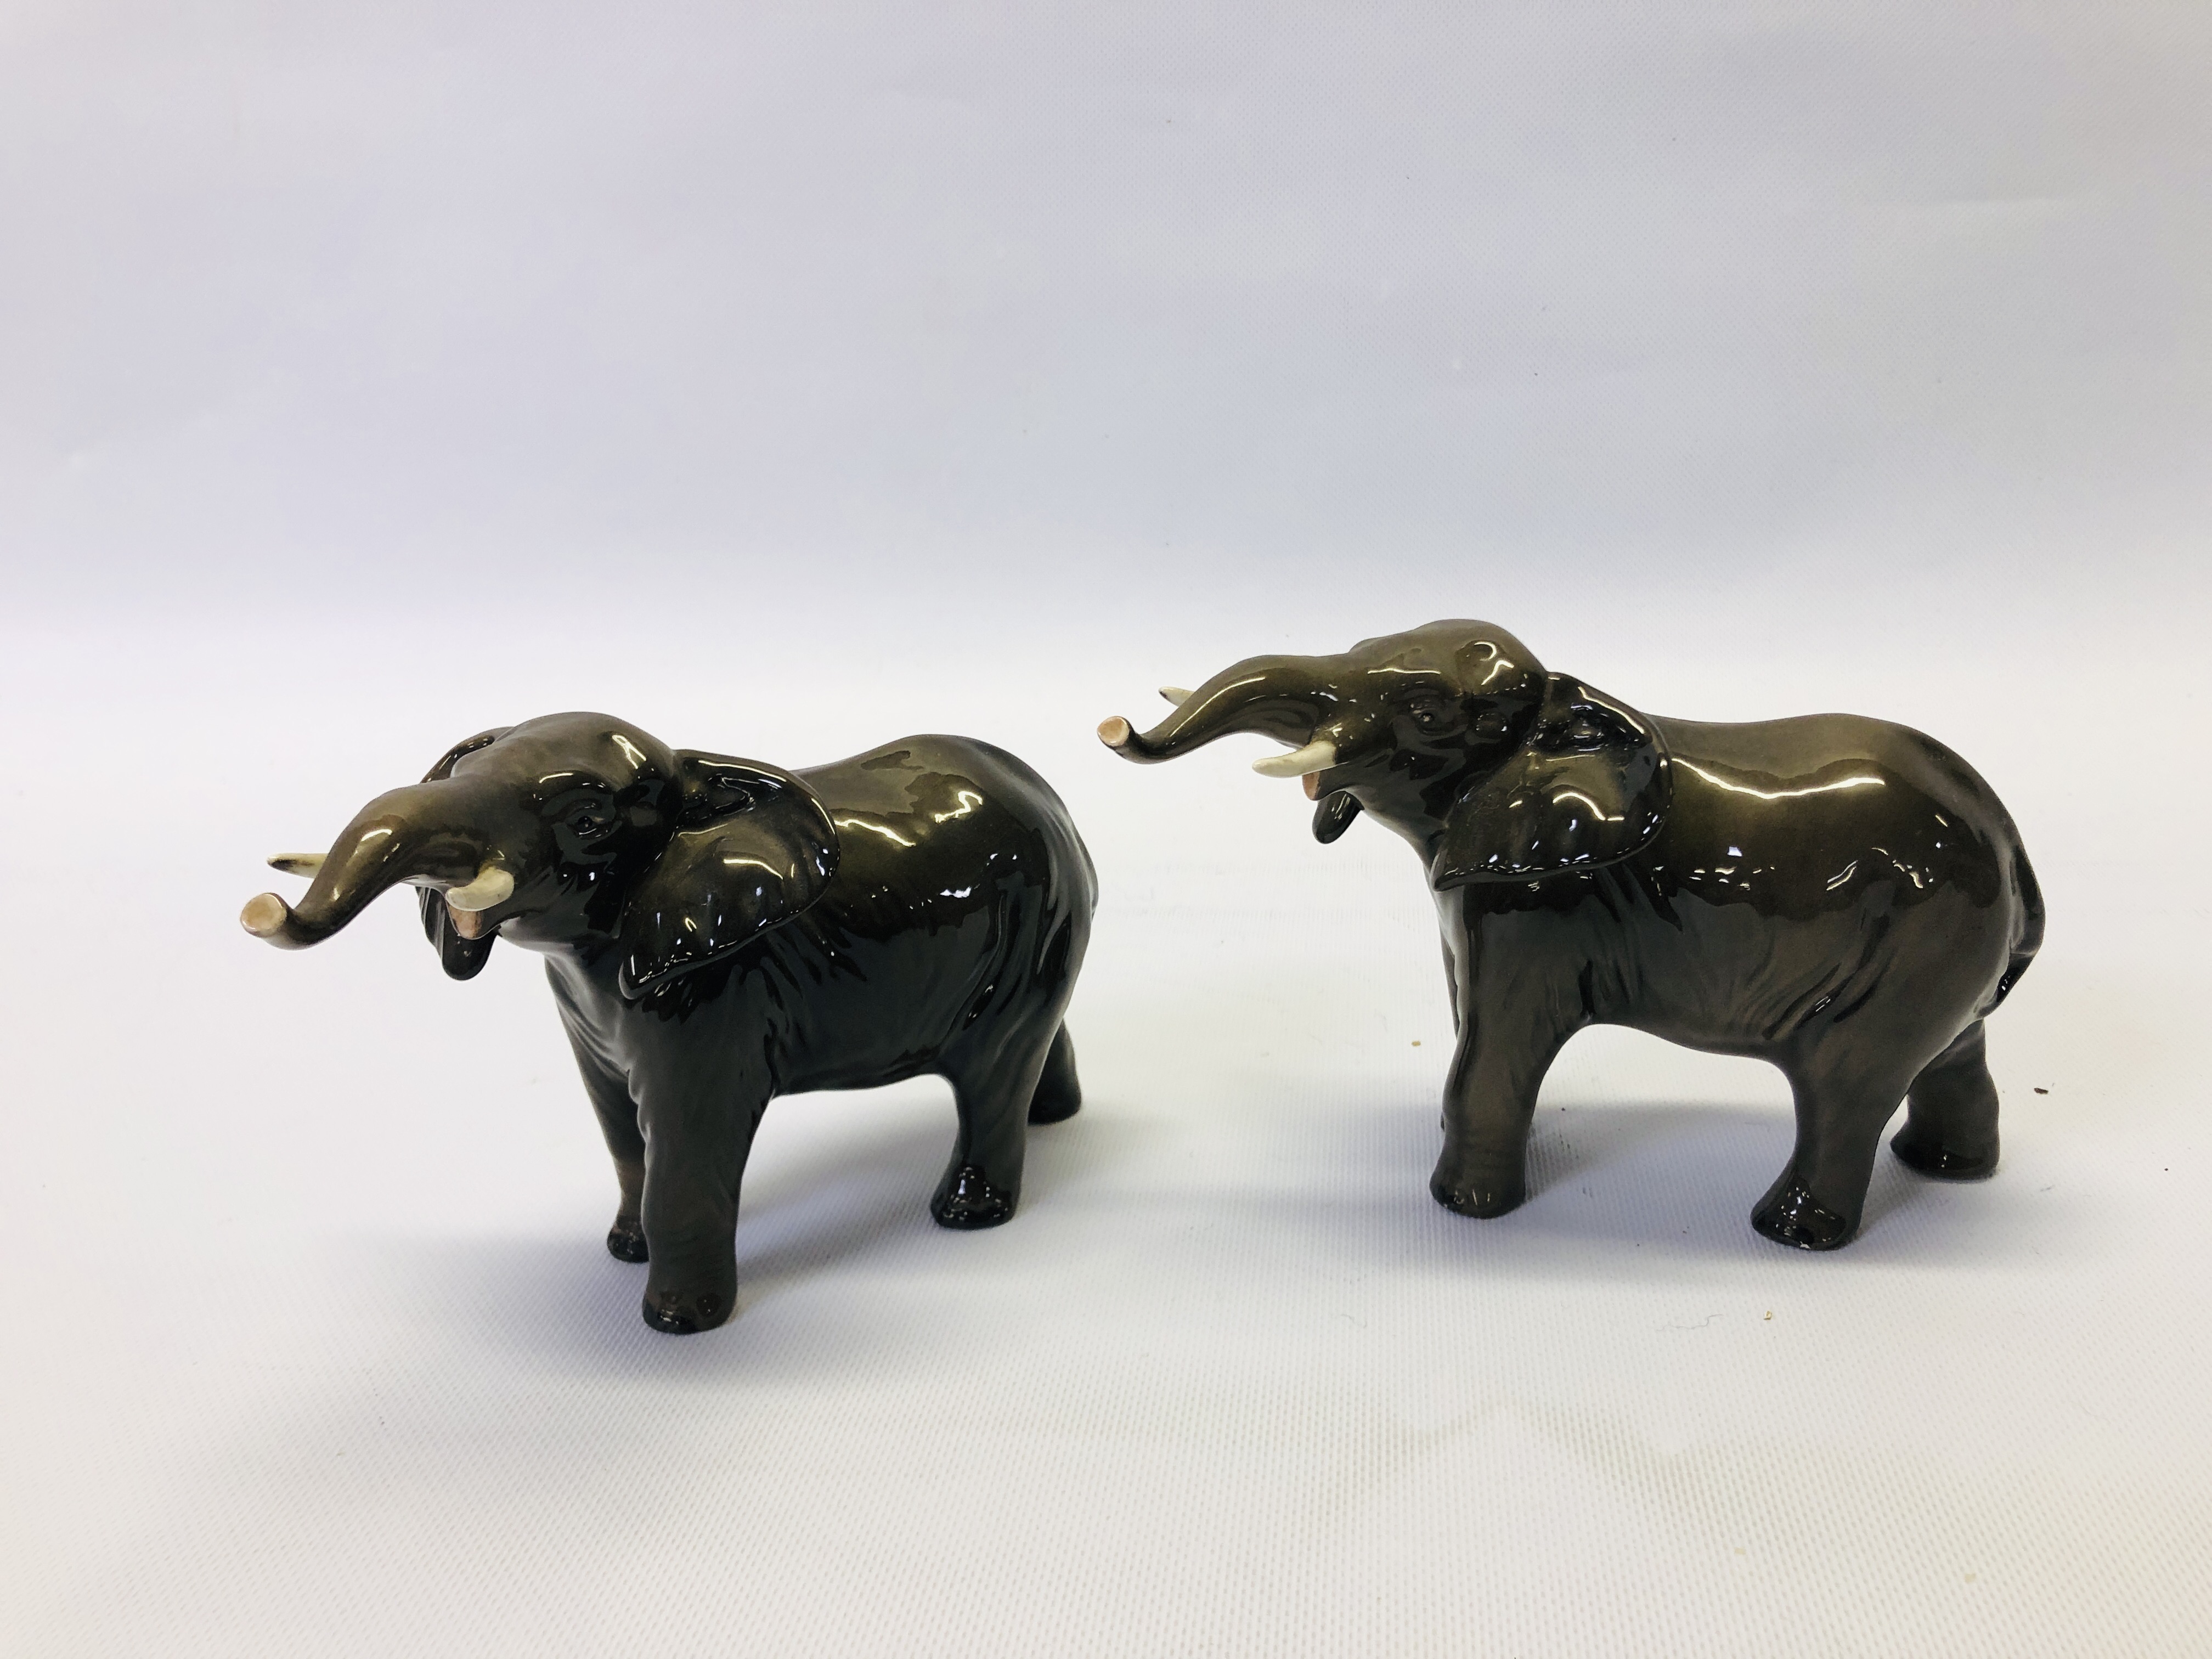 A PAIR OF BESWICK ELEPHANT ORNAMENTS - HEIGHT 12CM.